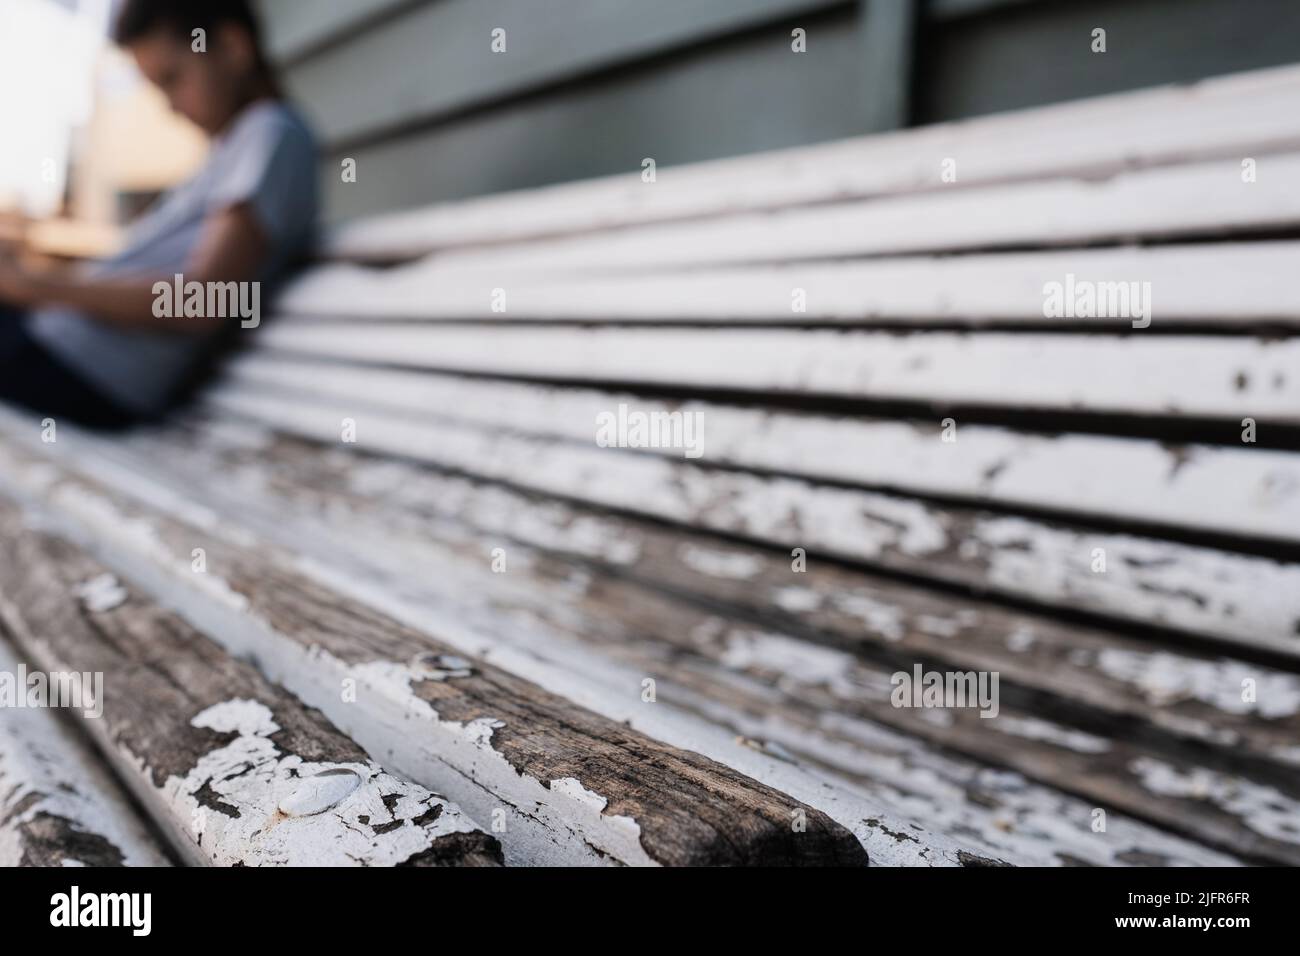 Abandoned bench, details of peeling white paint and wooden material.Silhouette of a child sitting with his head bowed.Concept for bullying, loneliness Stock Photo